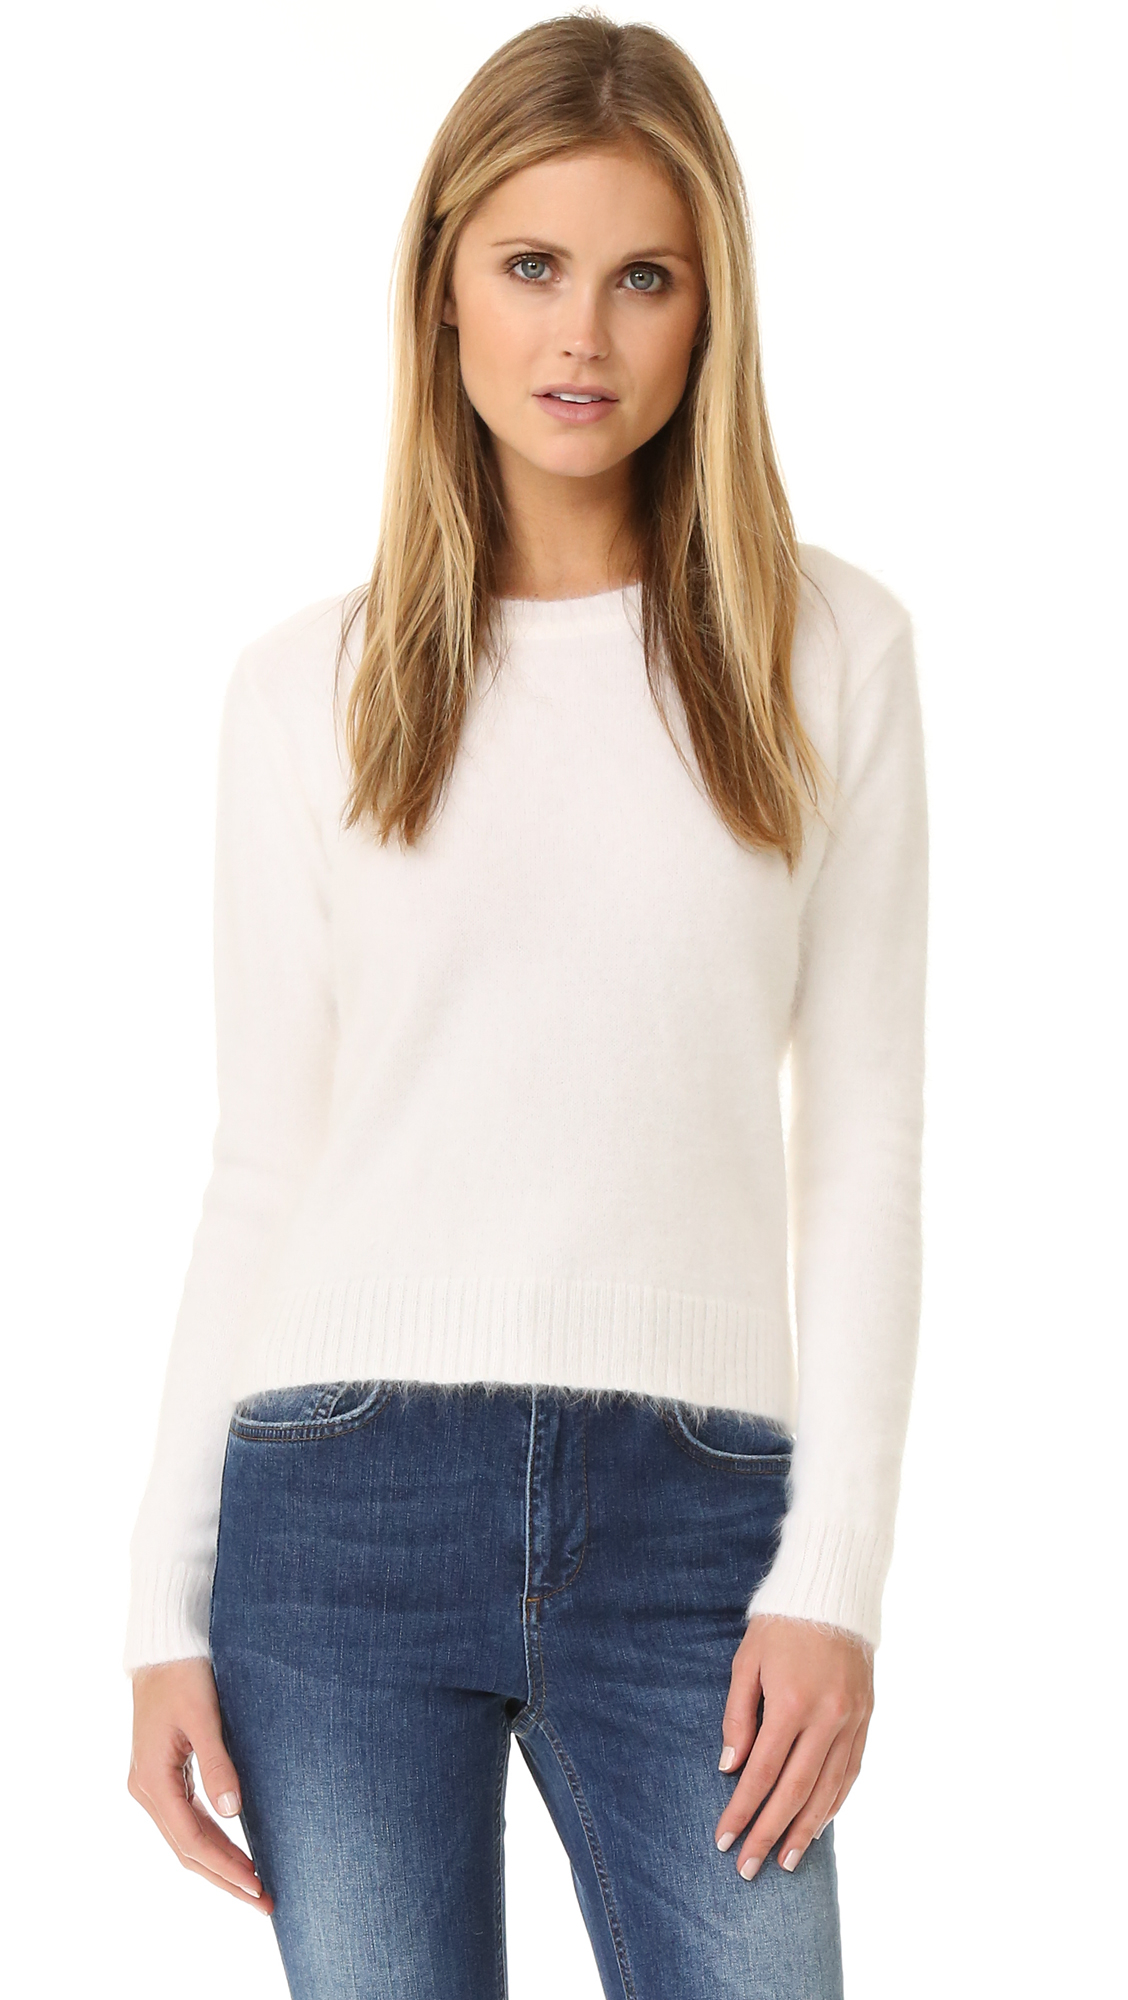 Anine Bing Synthetic Fuzzy Sweater in White - Lyst